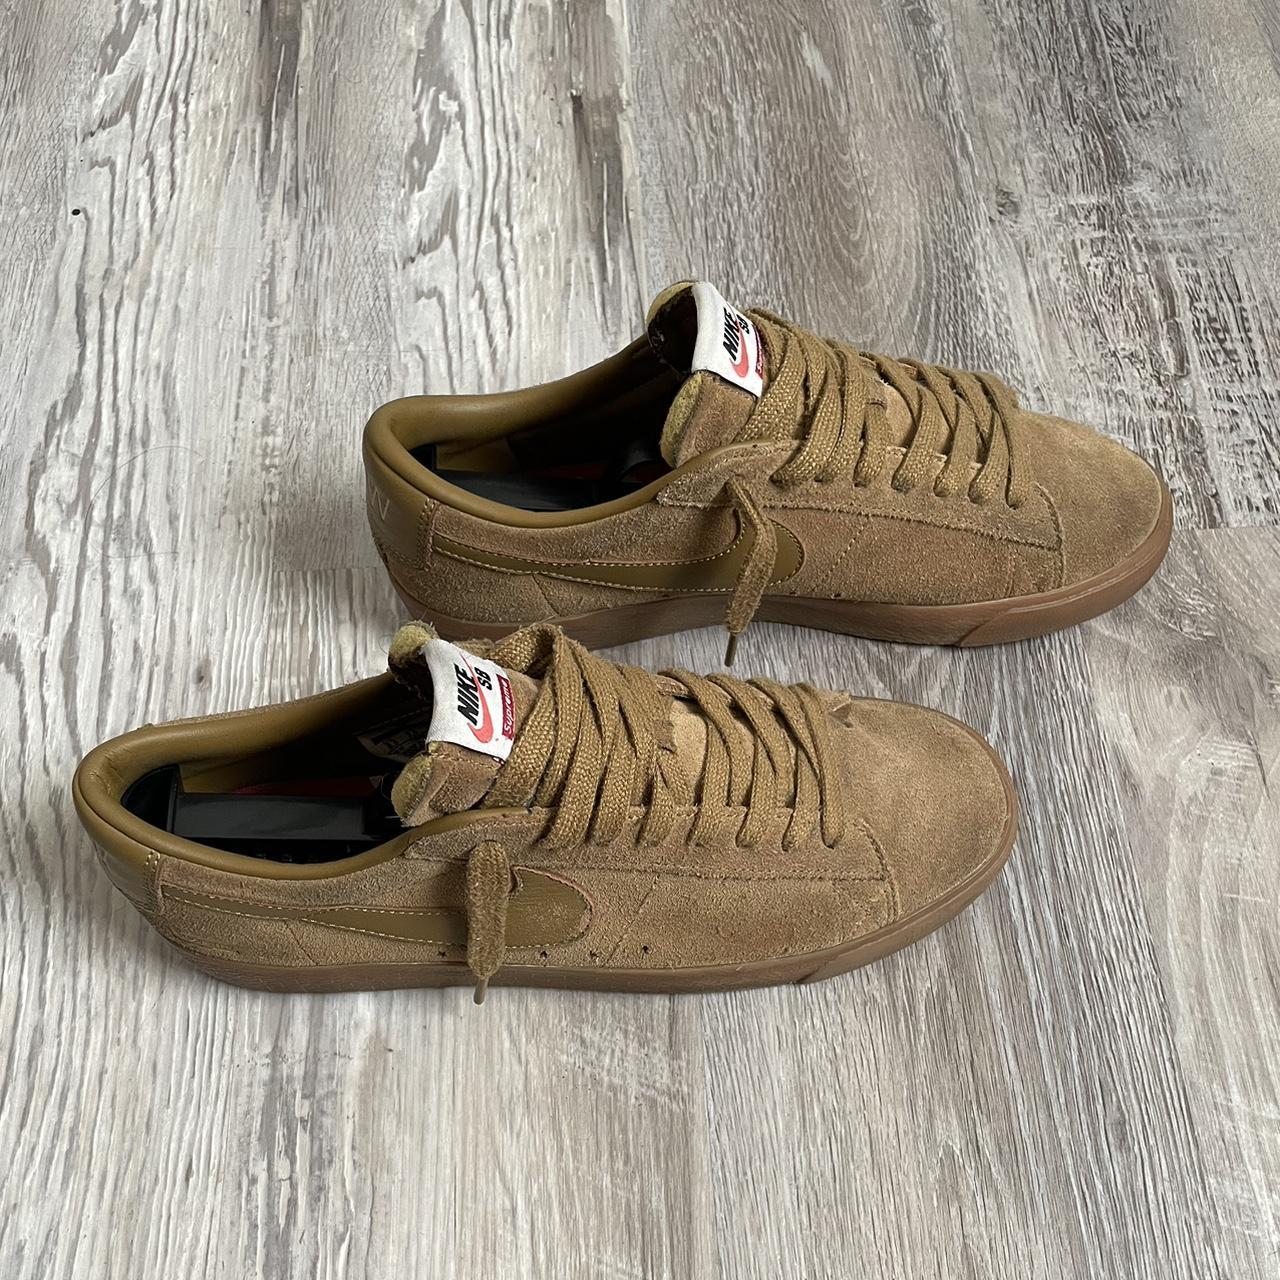 Supreme Men's Tan and Brown Trainers (3)